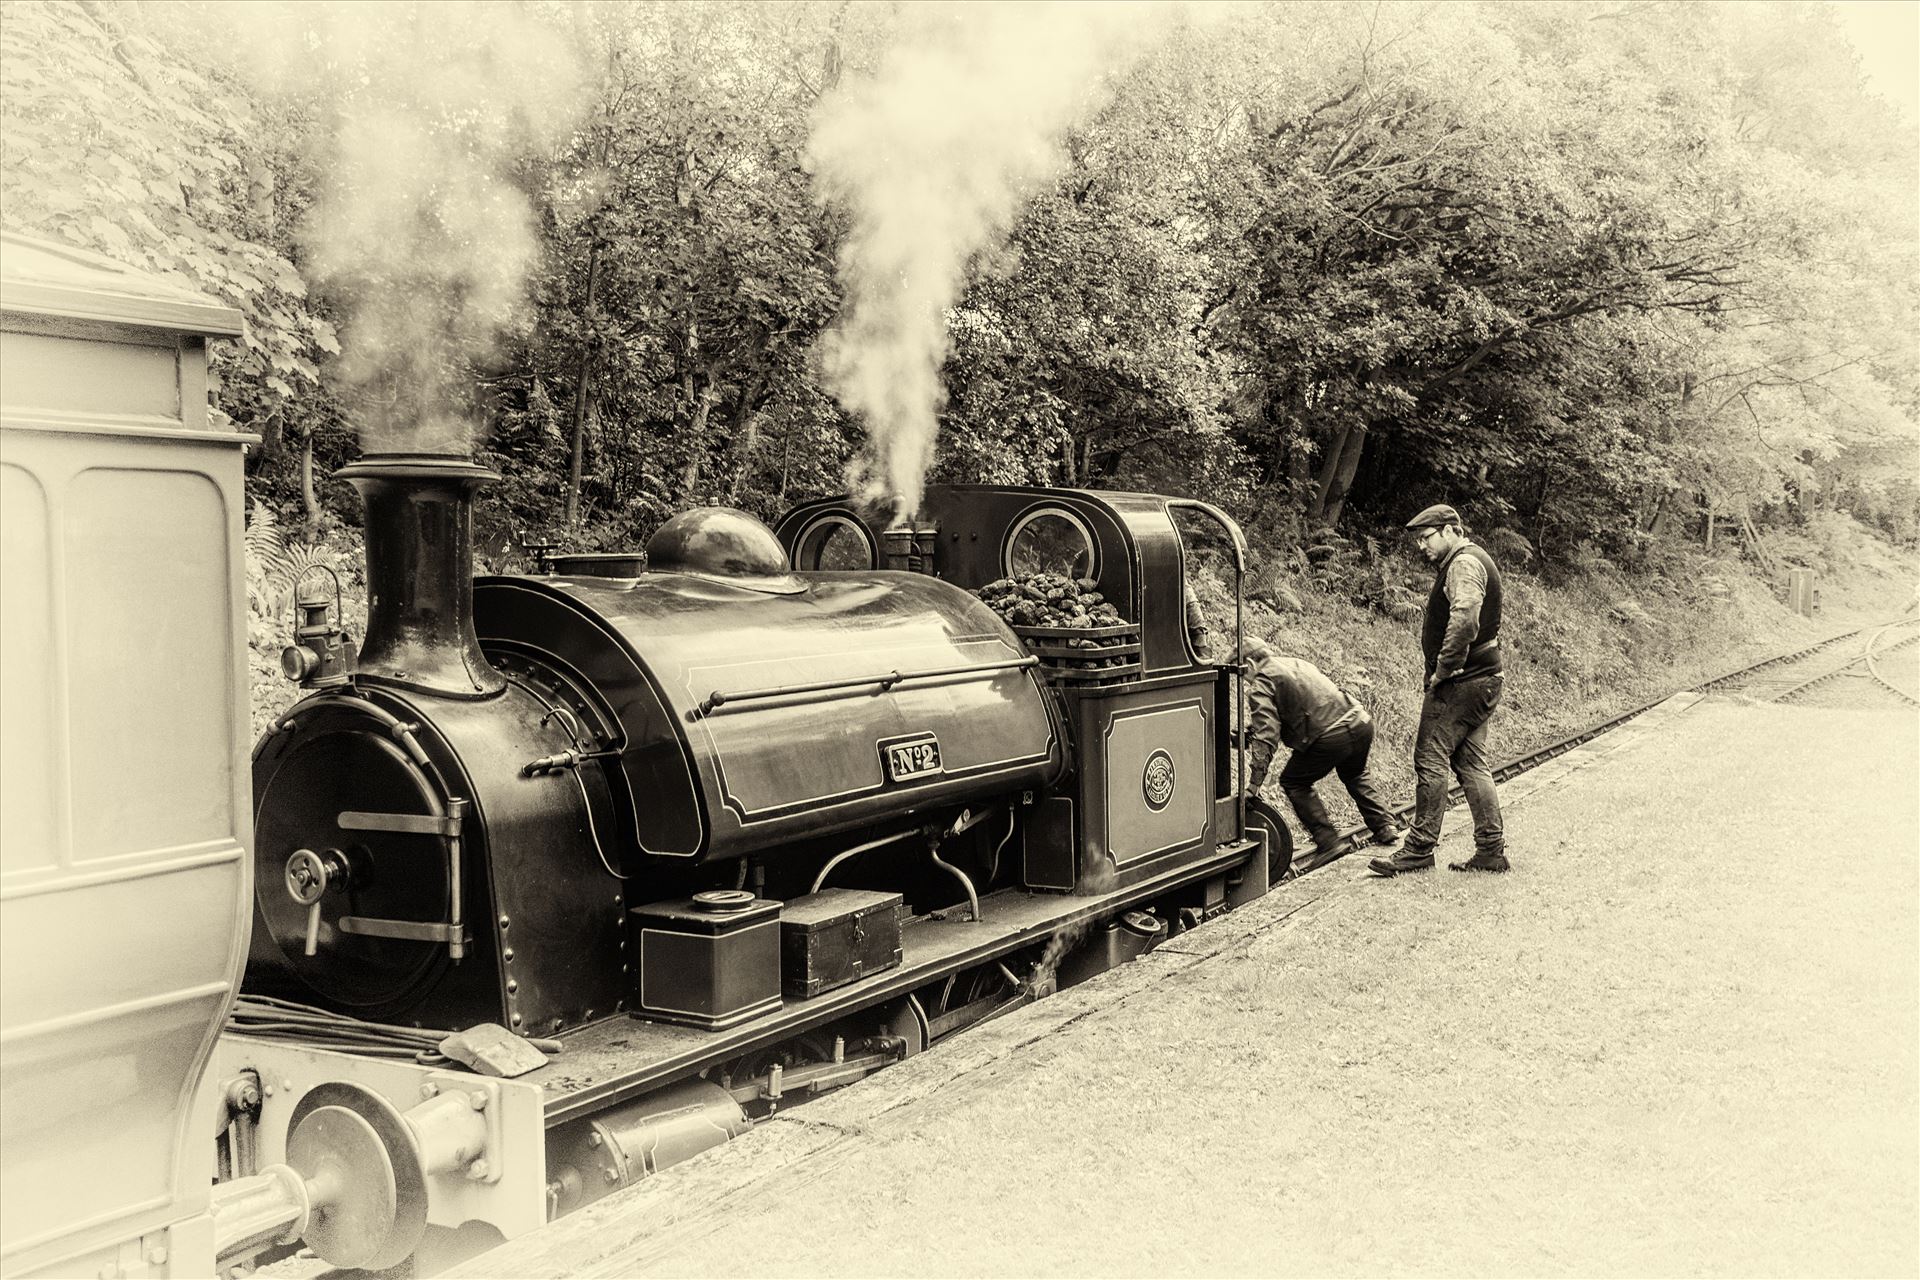 Steam train at Tanfield railway  by philreay